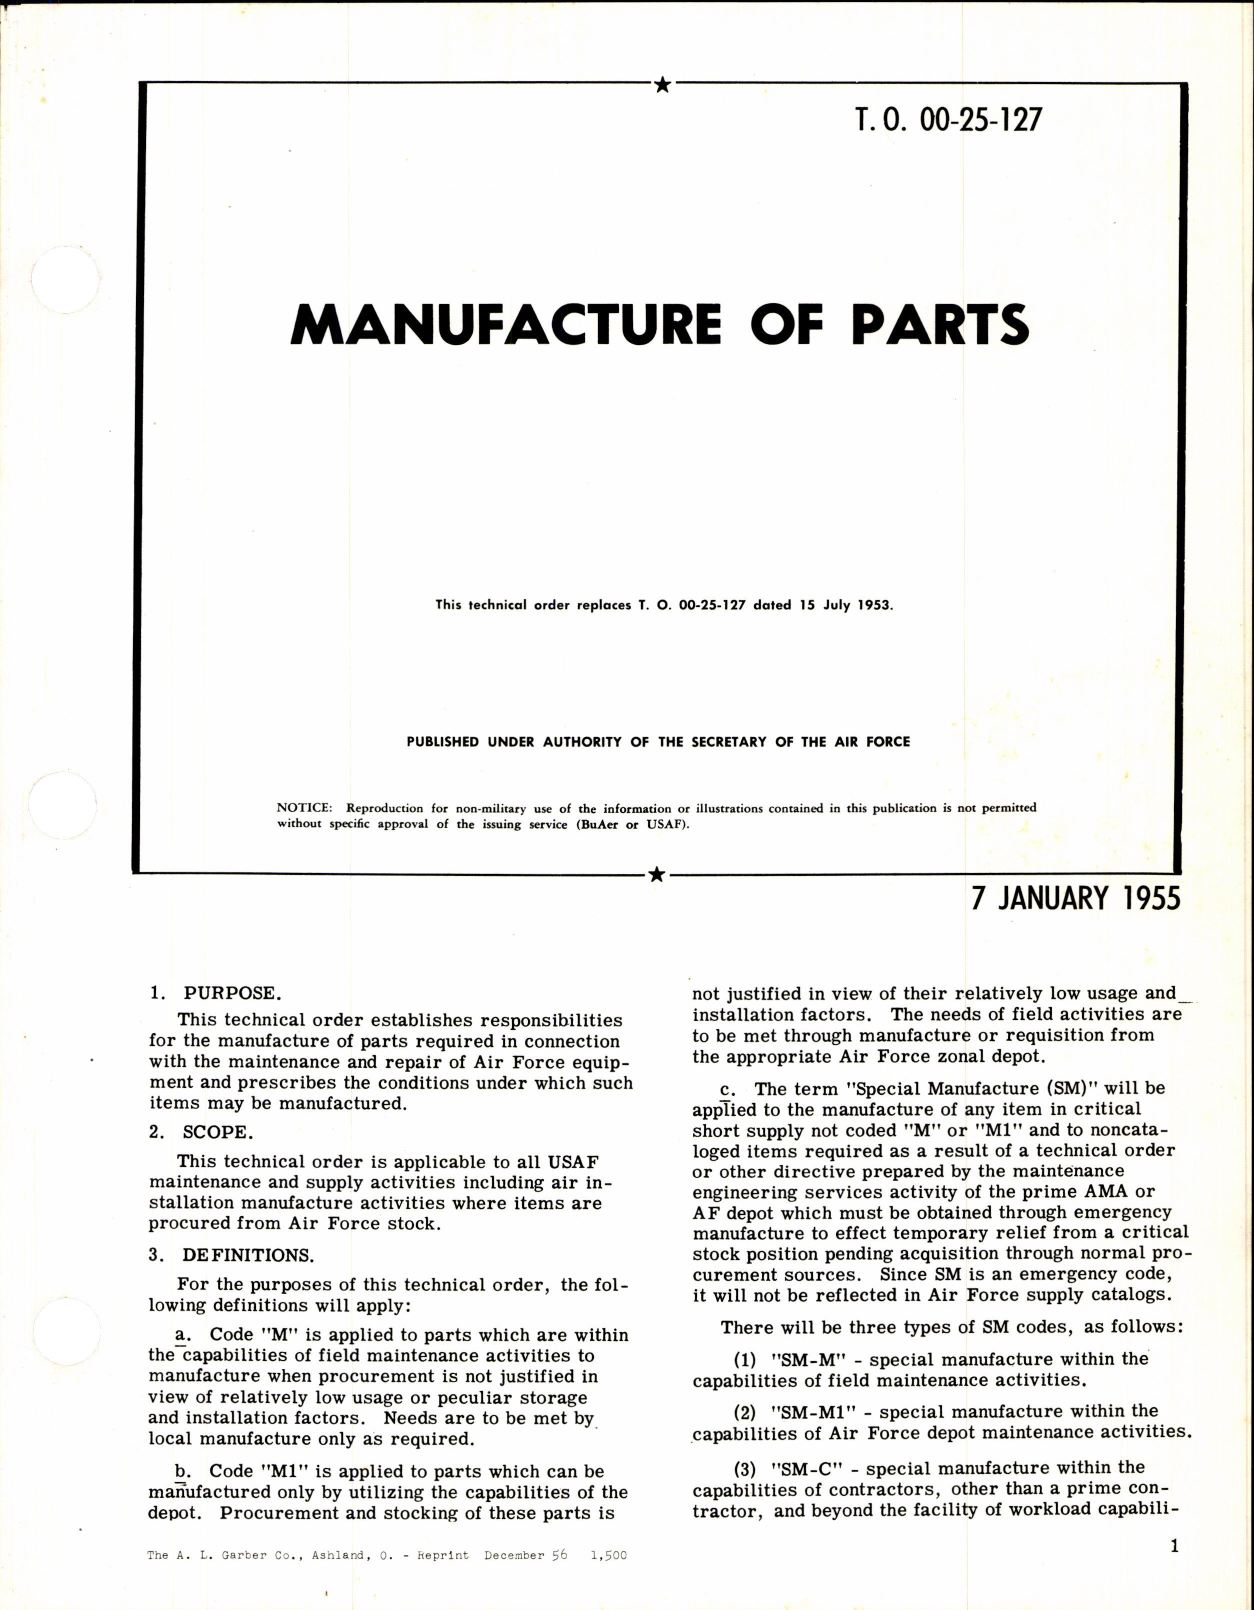 Sample page 1 from AirCorps Library document: Manufacture of Parts